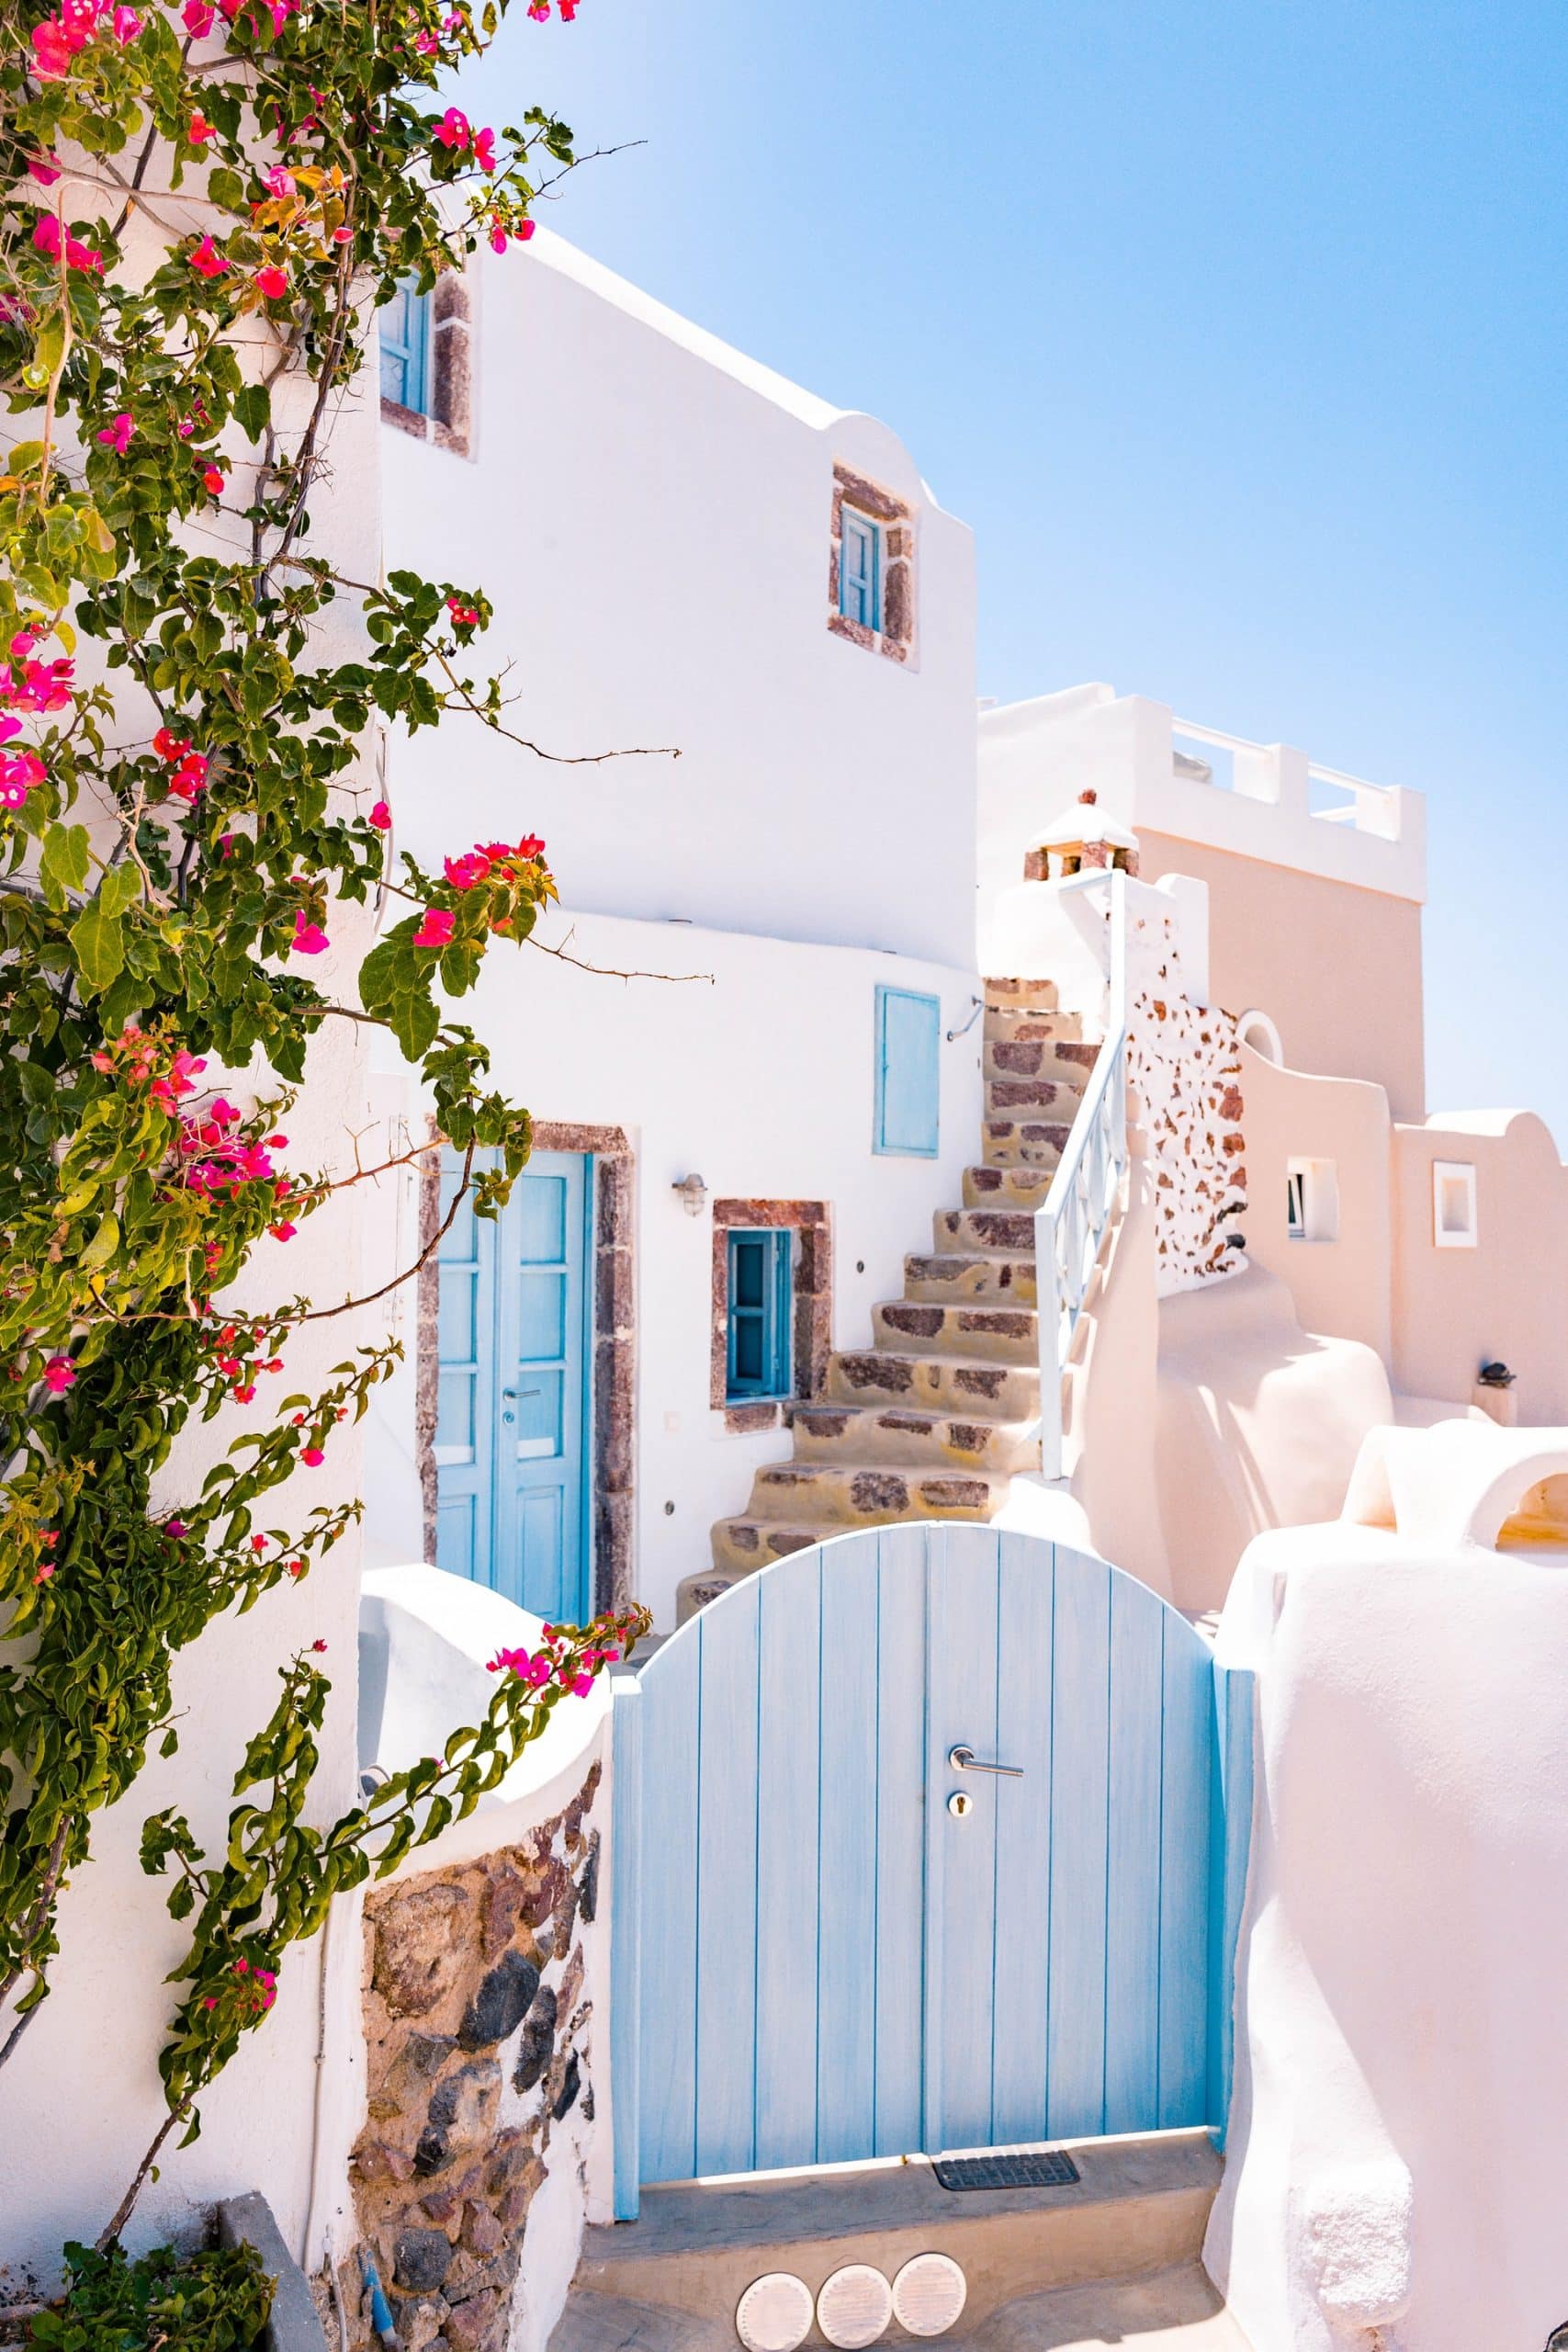 How to legally elope in Greece